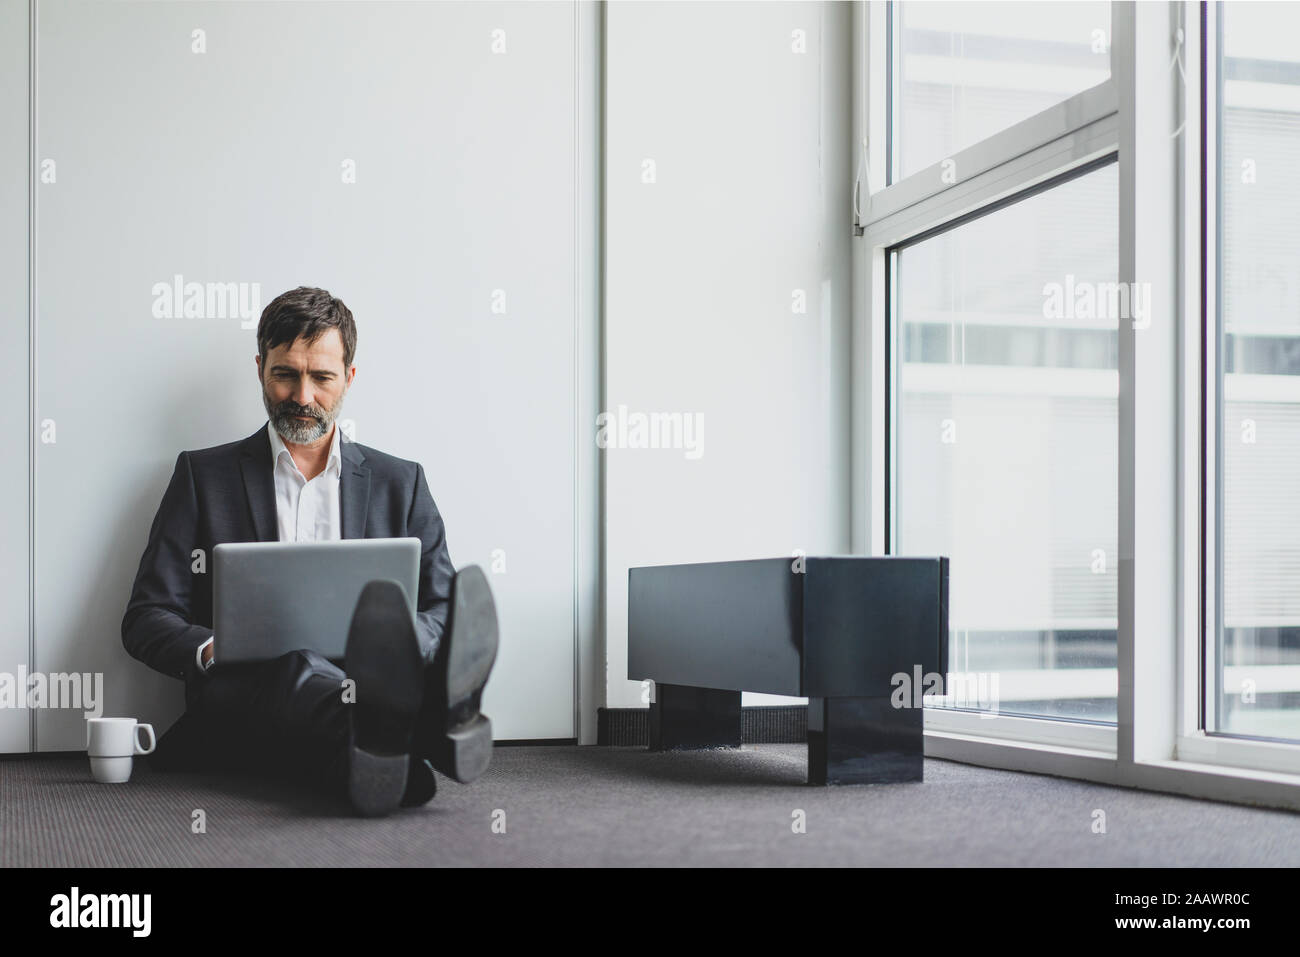 Mature businessman in office sitting on the floor using laptop Stock Photo